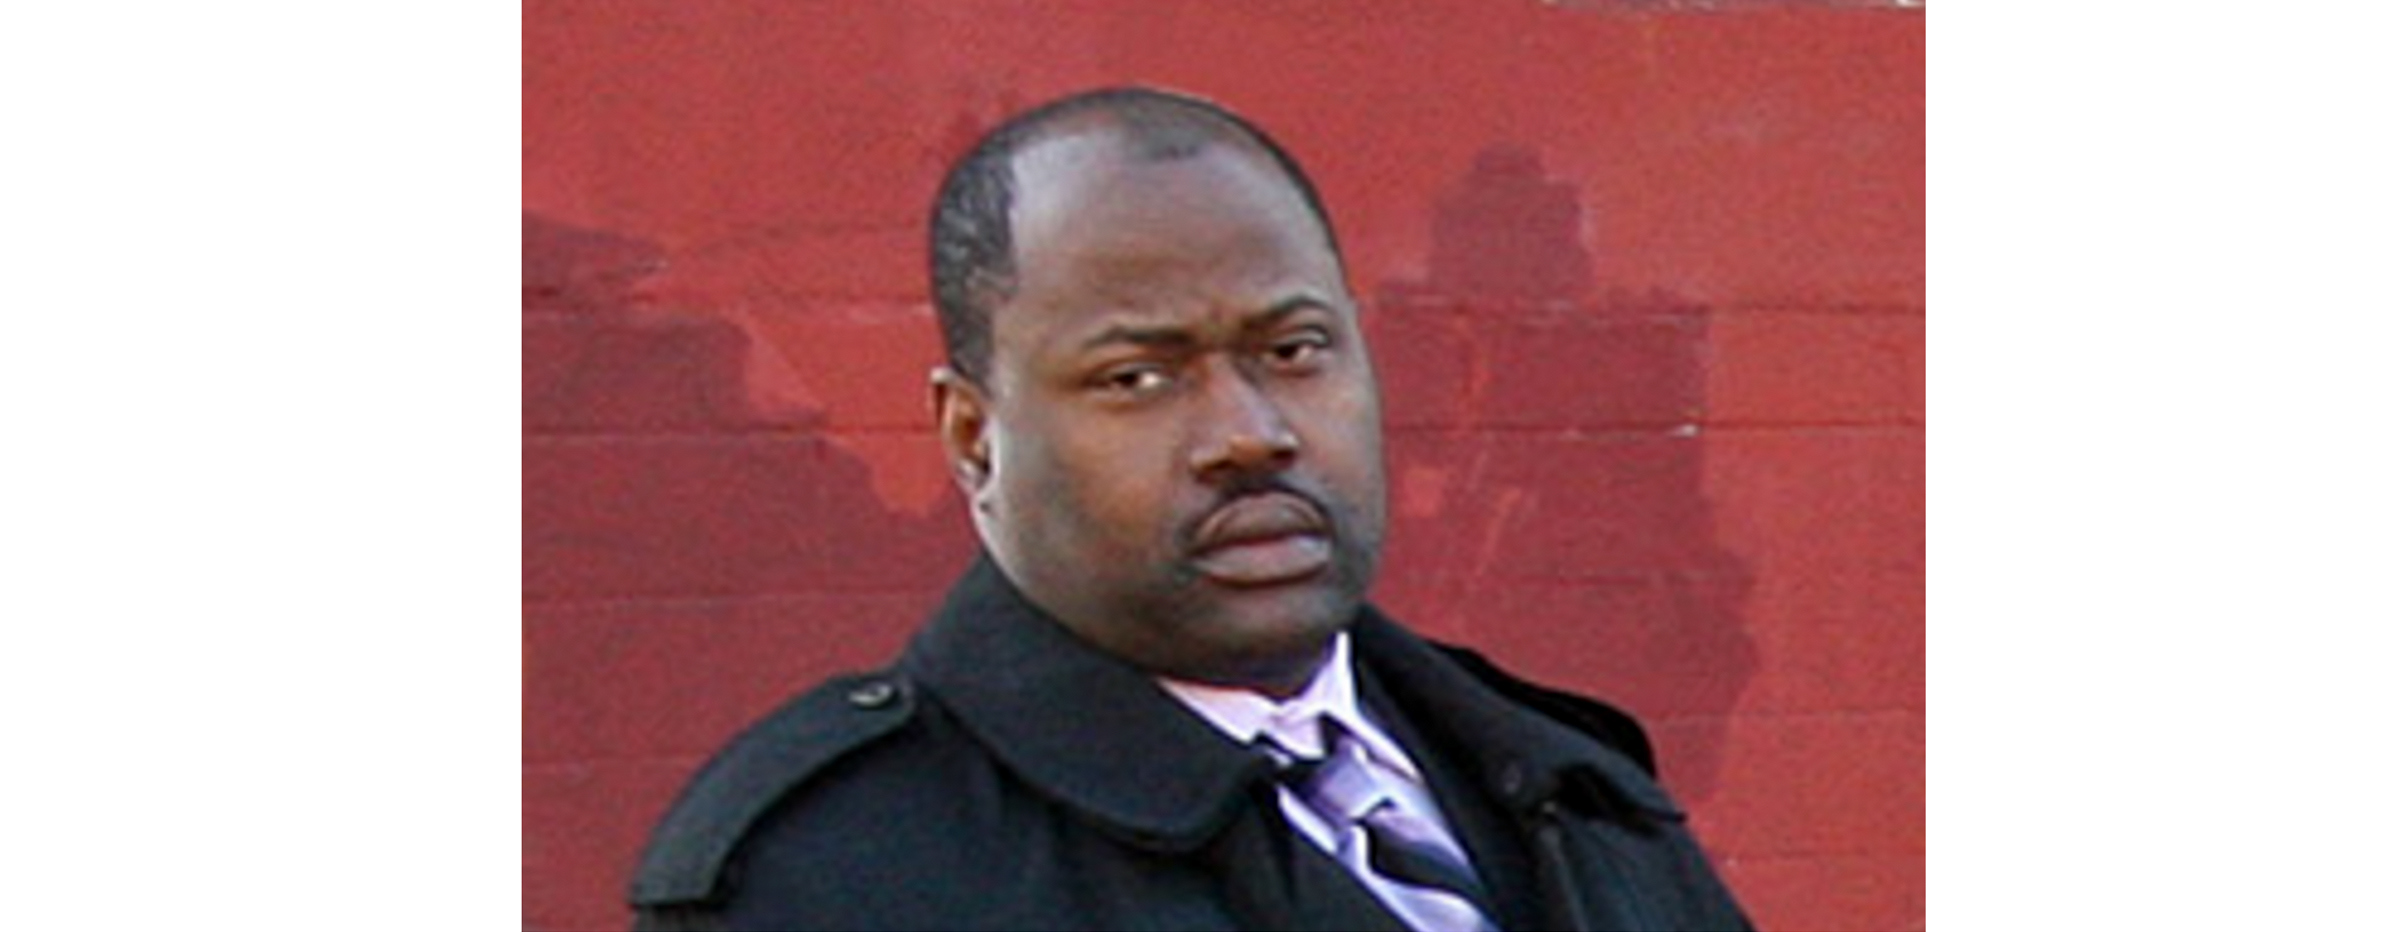 Philadelphia Police Detective James Pitts in a 2011 Inquirer file photograph.